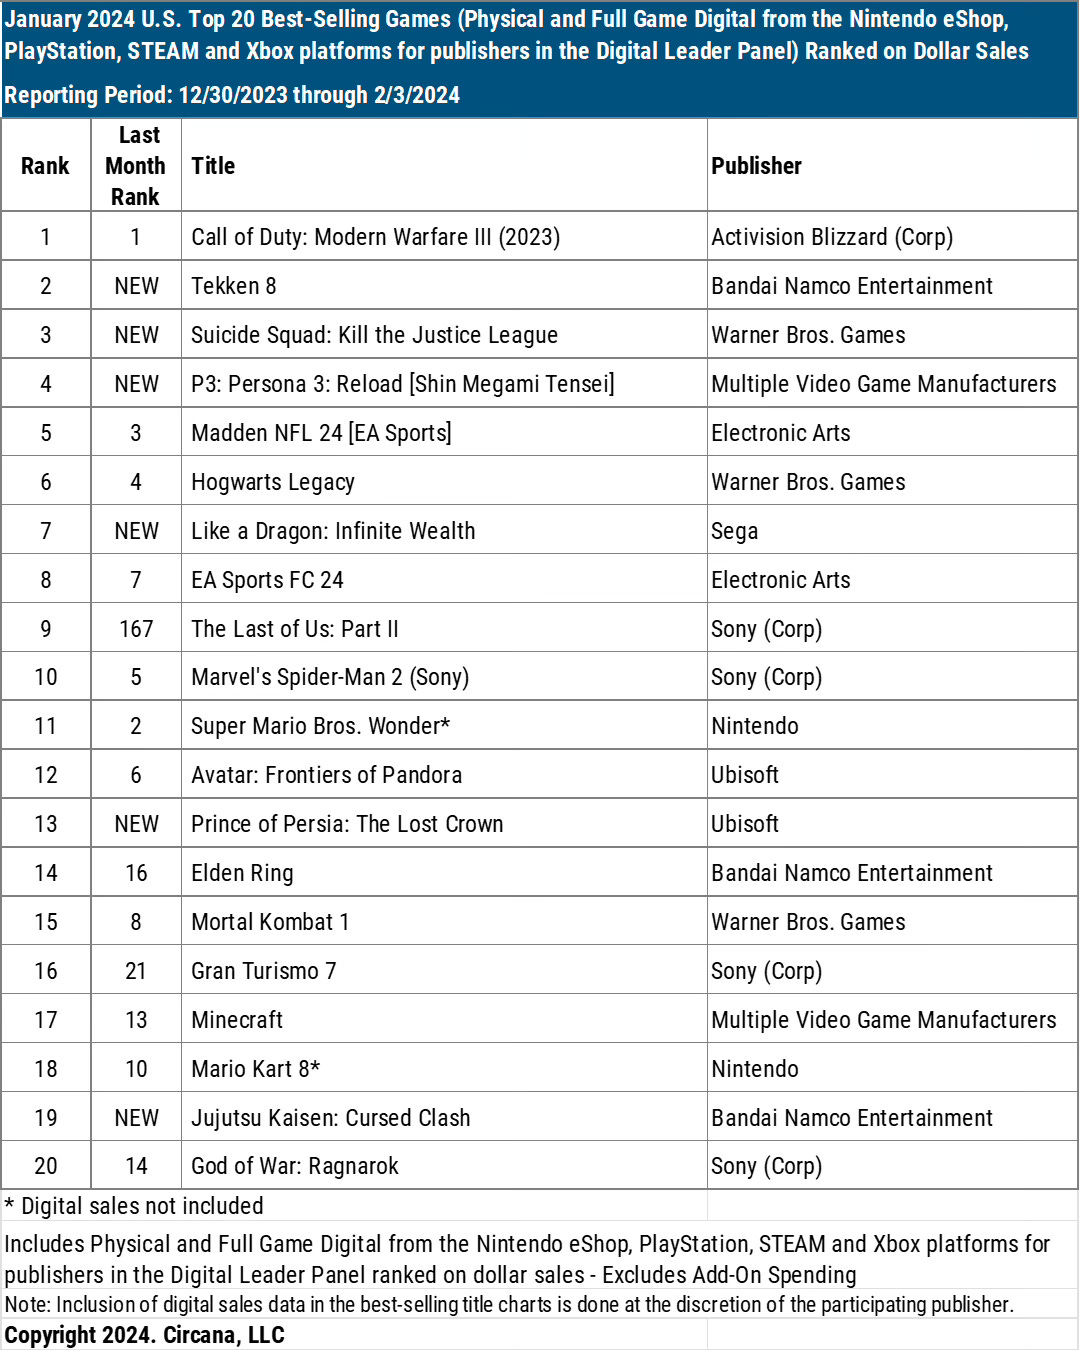 Chart showing the top 20 best-selling games in the U.S. in January 2024 across consoles and Steam